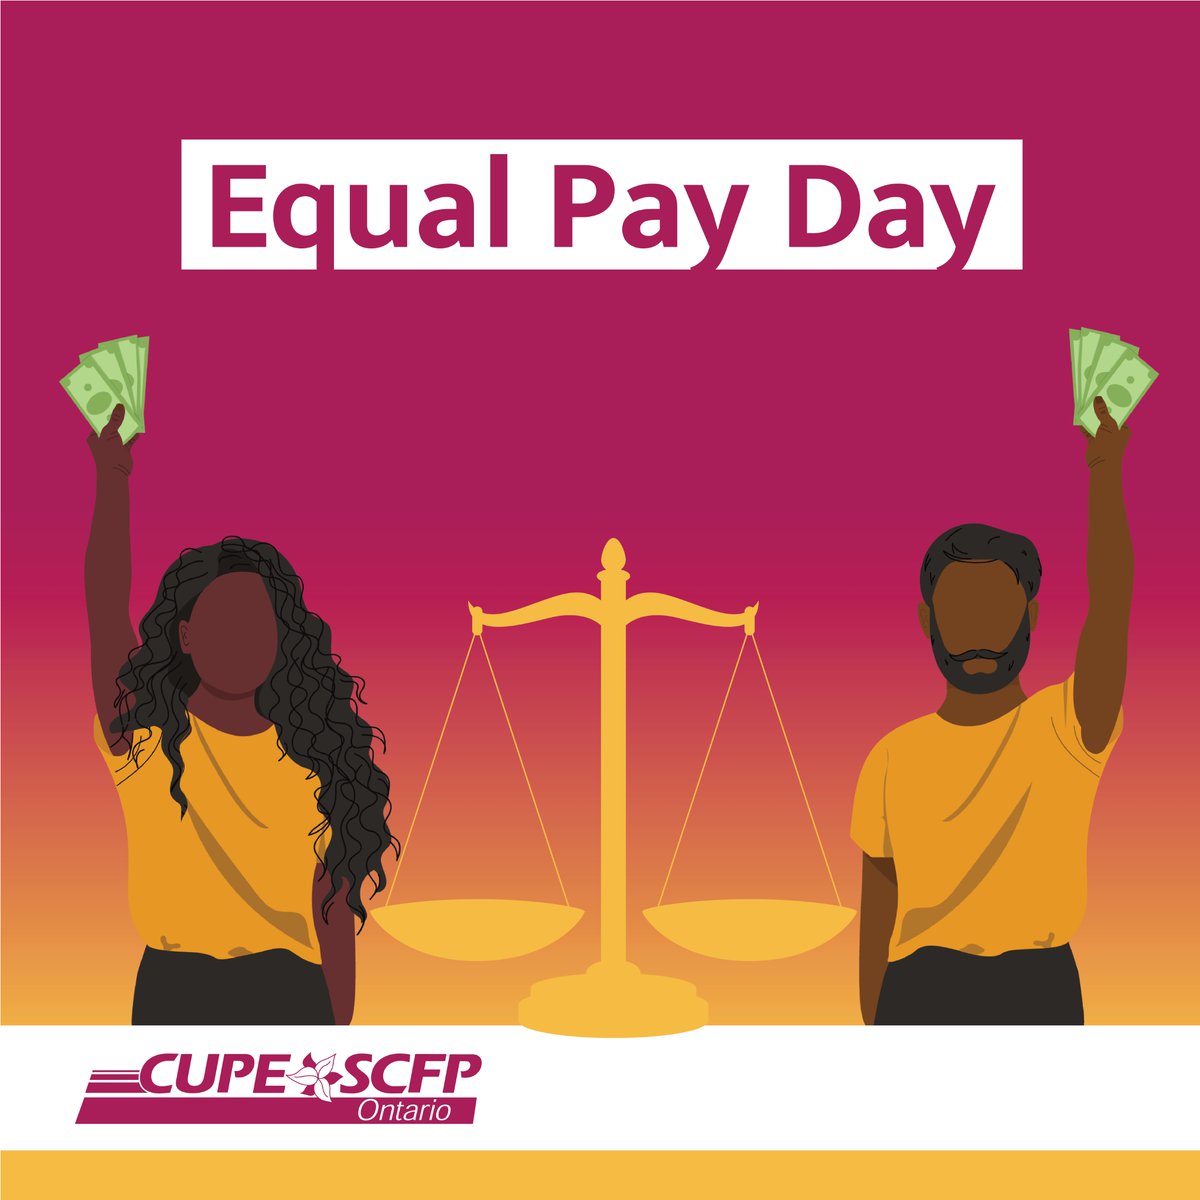 Equal Pay Day this year is April 16, 2024. It symbolizes how far into 2024 the average woman must work to earn what the average man earned in 2023. Learn more about the coalition work taking place, find resources, and ways to take action here: equalpaycoalition.org